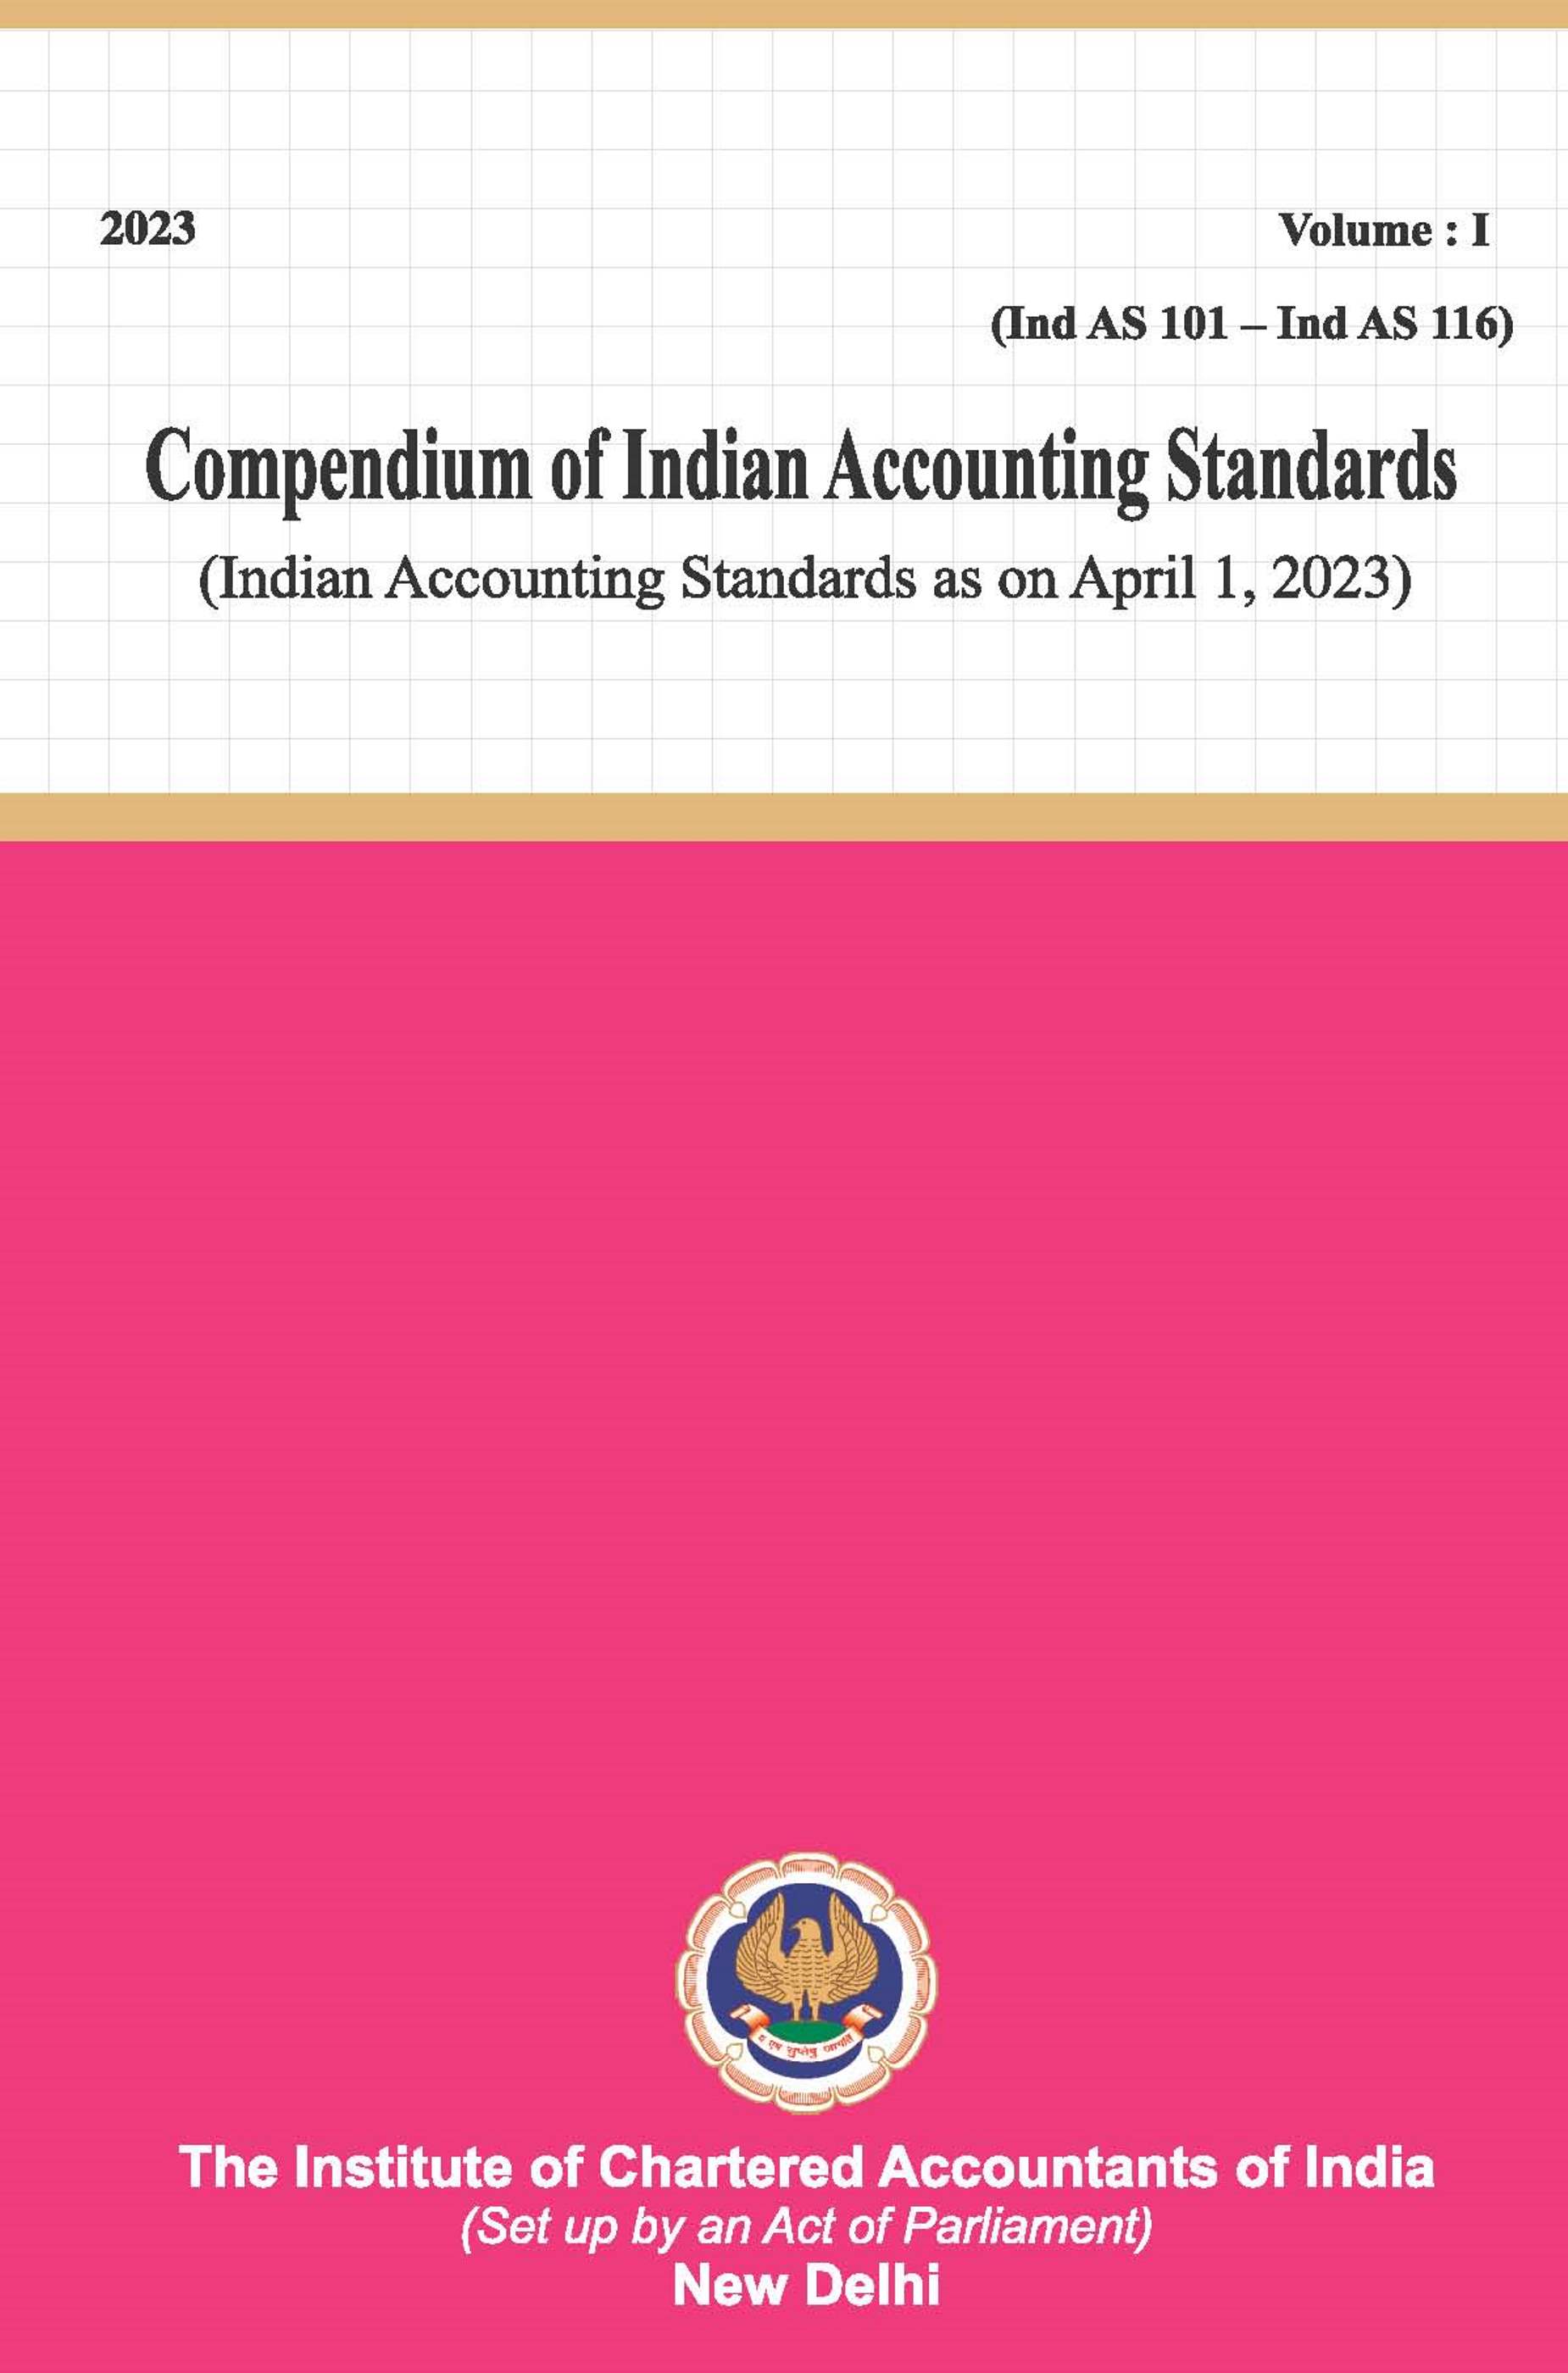 Compendium of Indian Accounting Standards (Indian Accounting Standards as on April, 1 2023) Volume - I & II